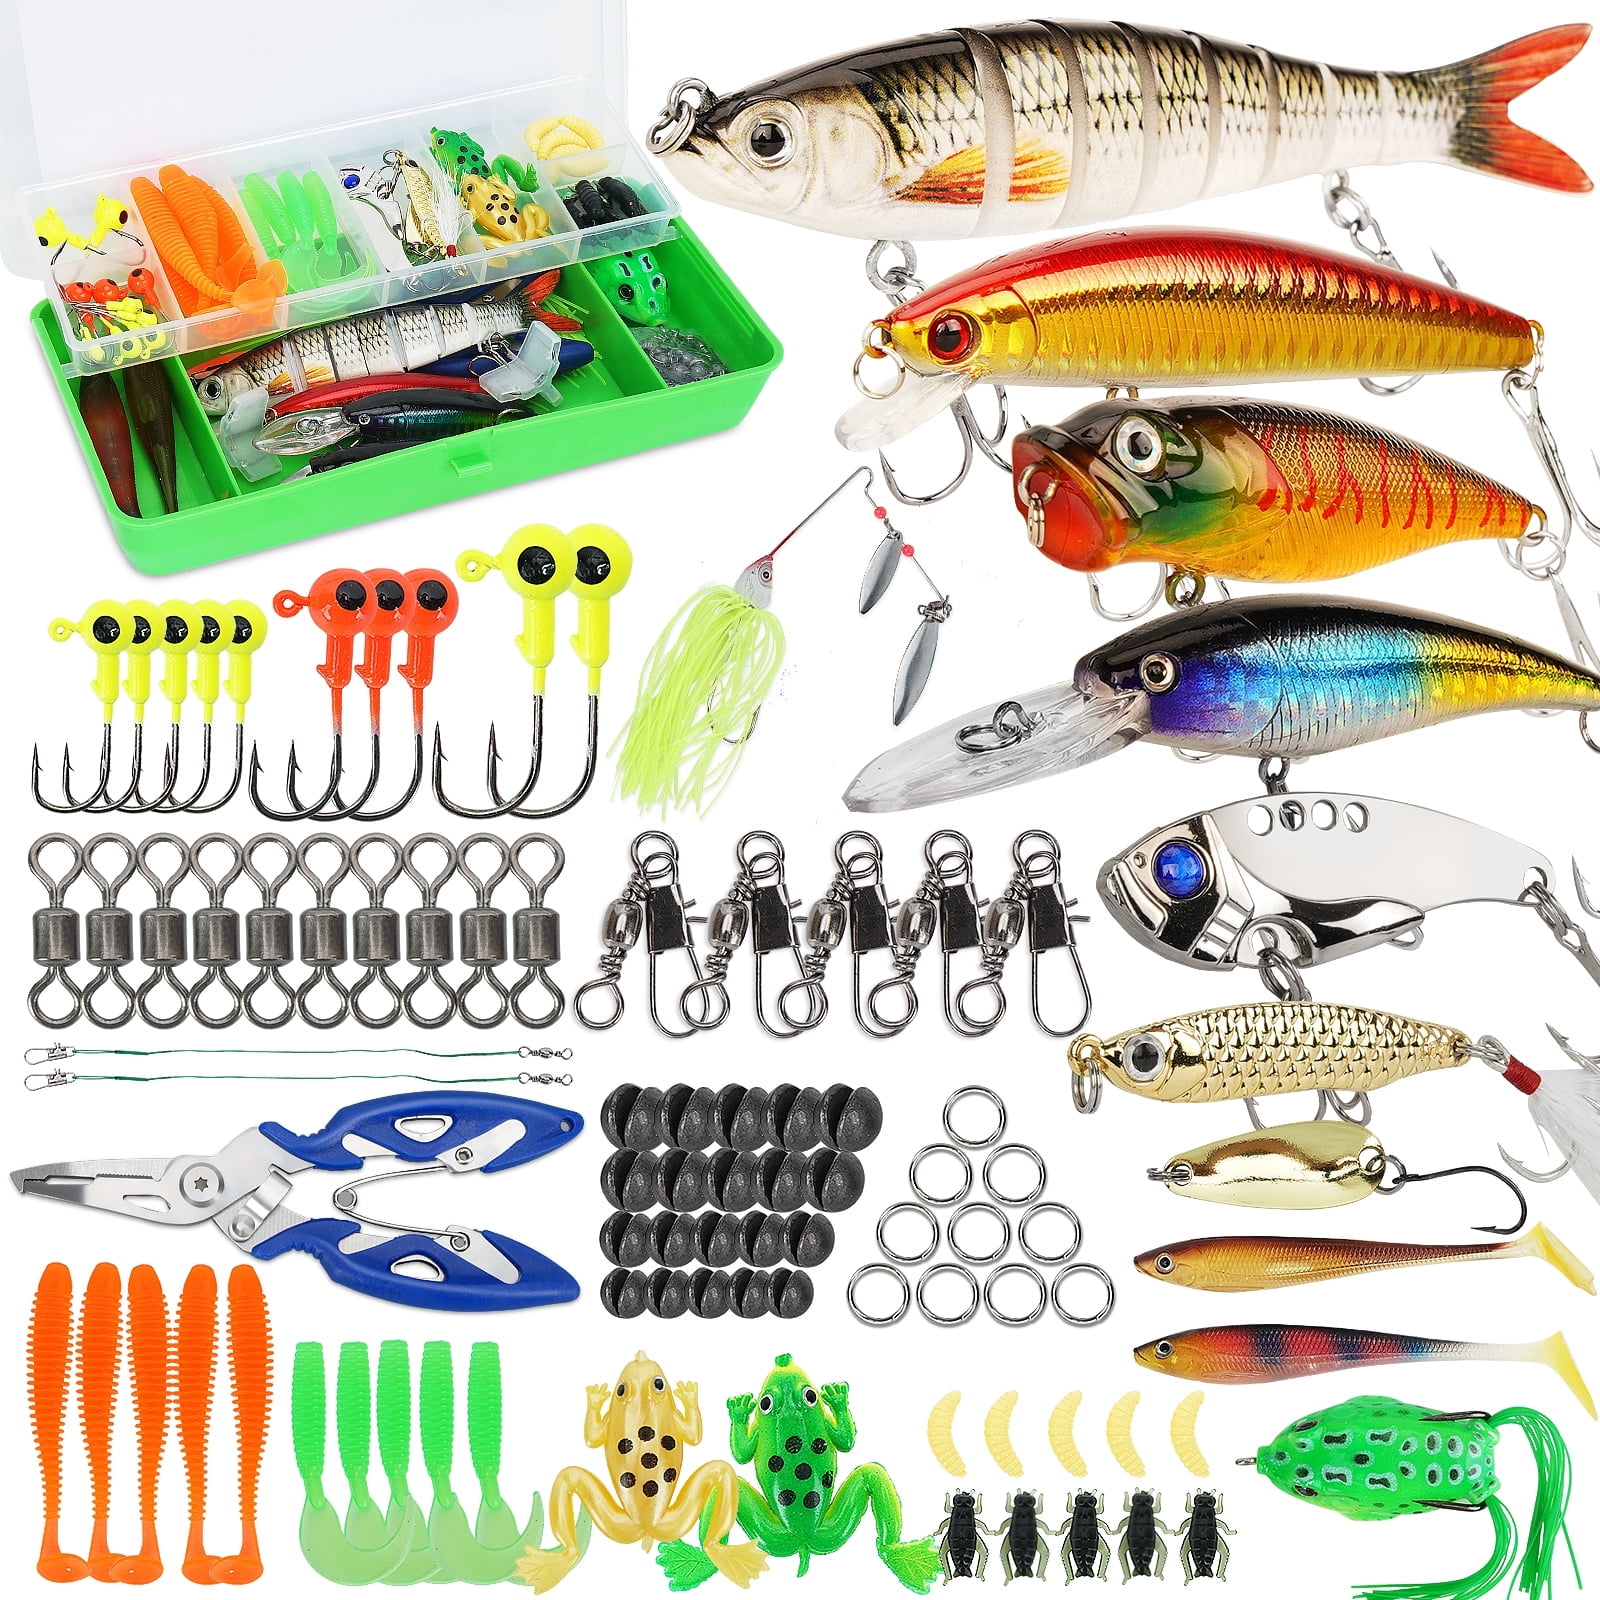 Fishing Lures Tackle Box Kit,Saltwater Freshwater Fishing Gear and